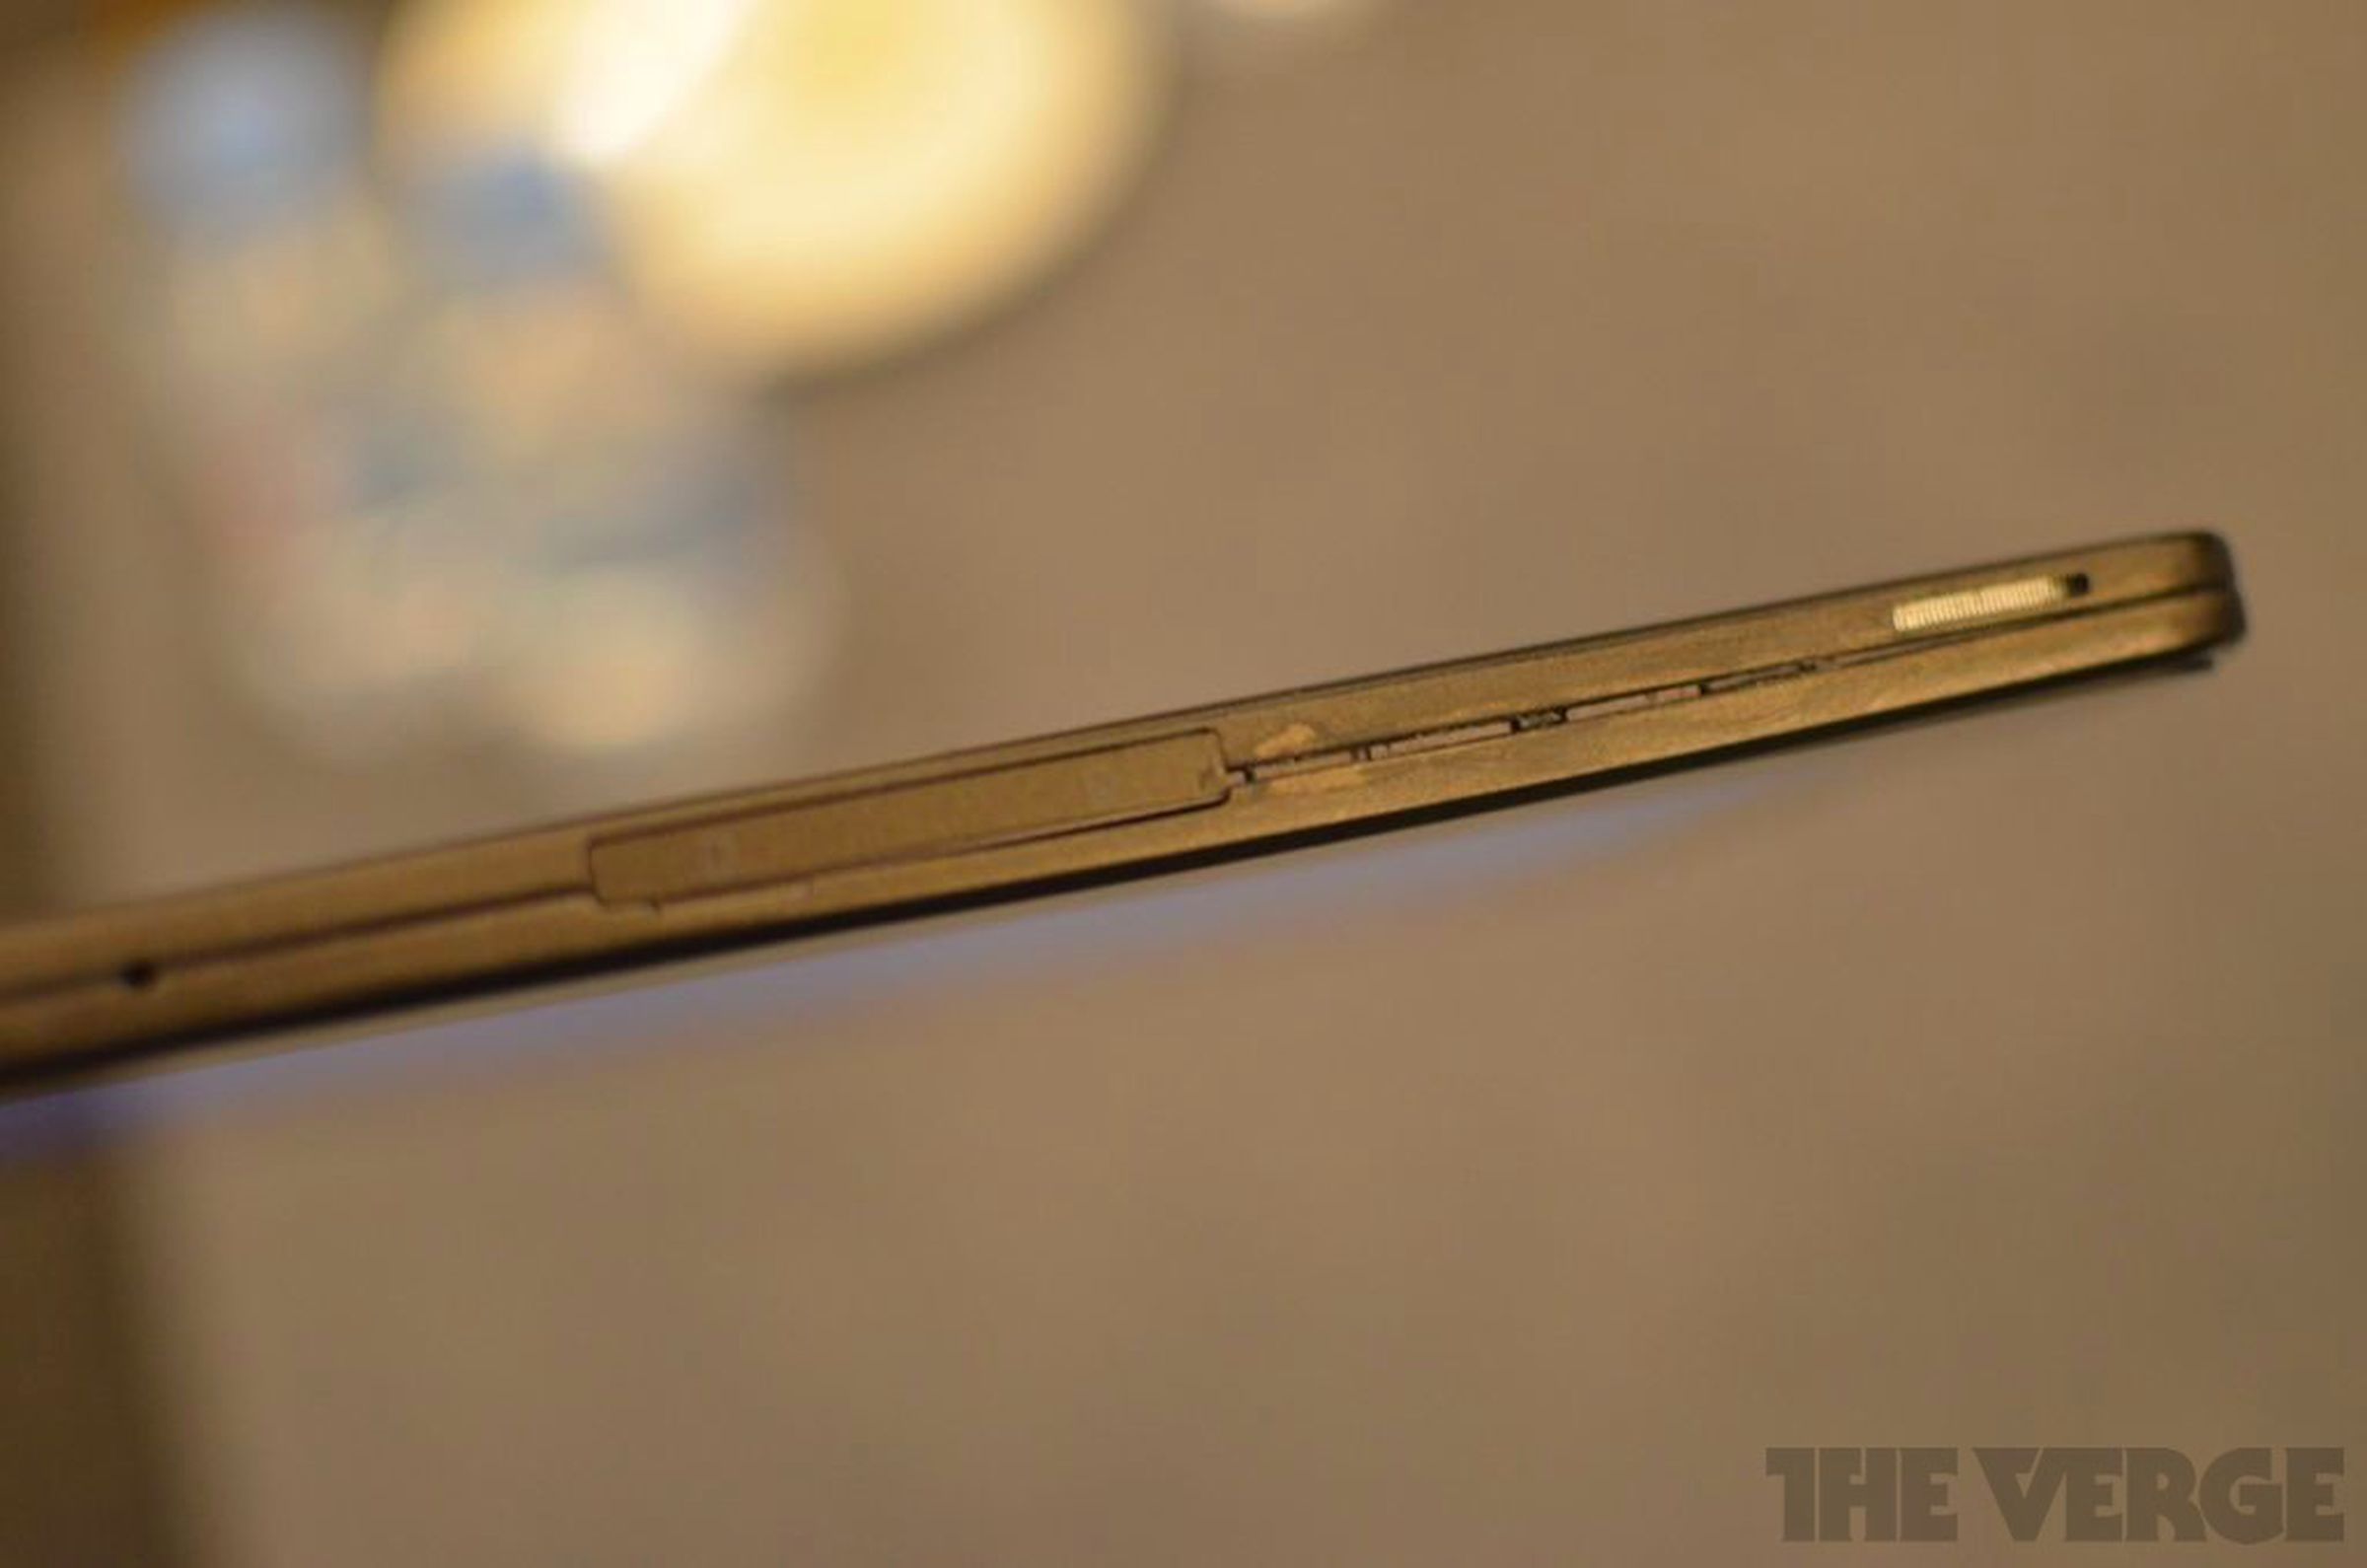 ZTE T98 and PF 100 Android tablet hands-on